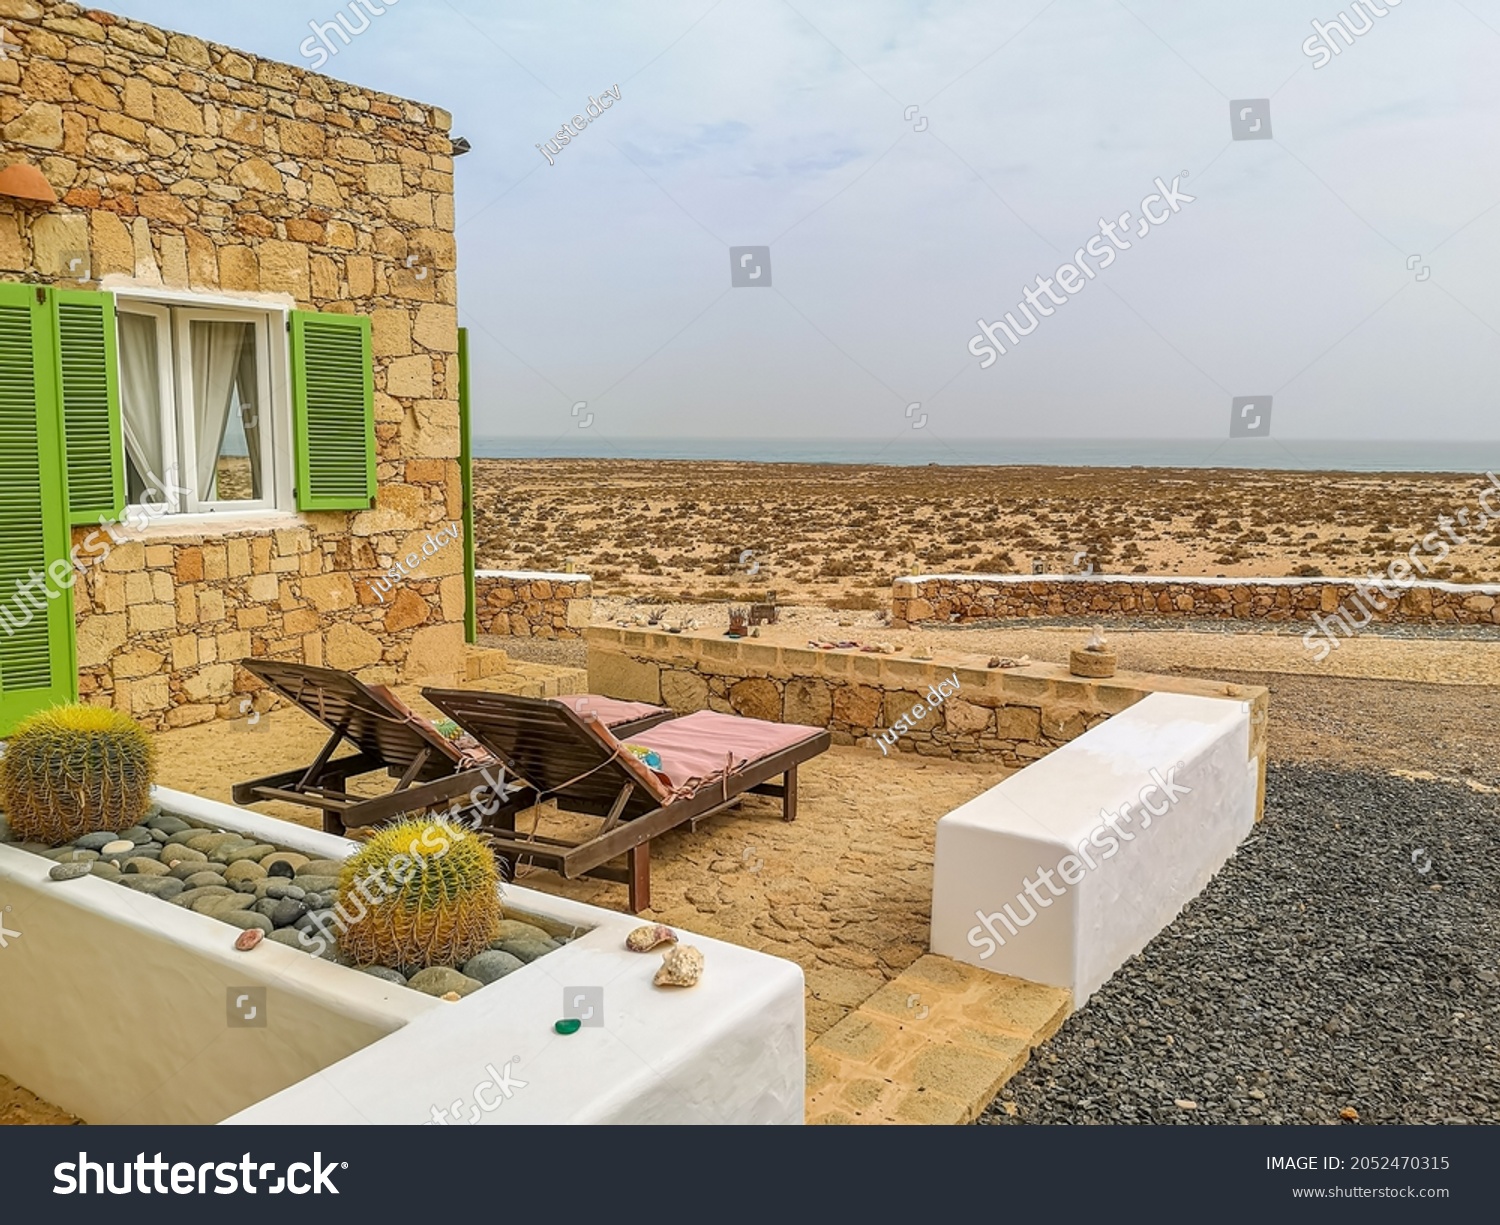 Sunbeds in terrace of an old stone house with majestic desert view. Boa Vista Island, Cape Verde, Africa. Selective focus on the building exterior, blurred background. #2052470315